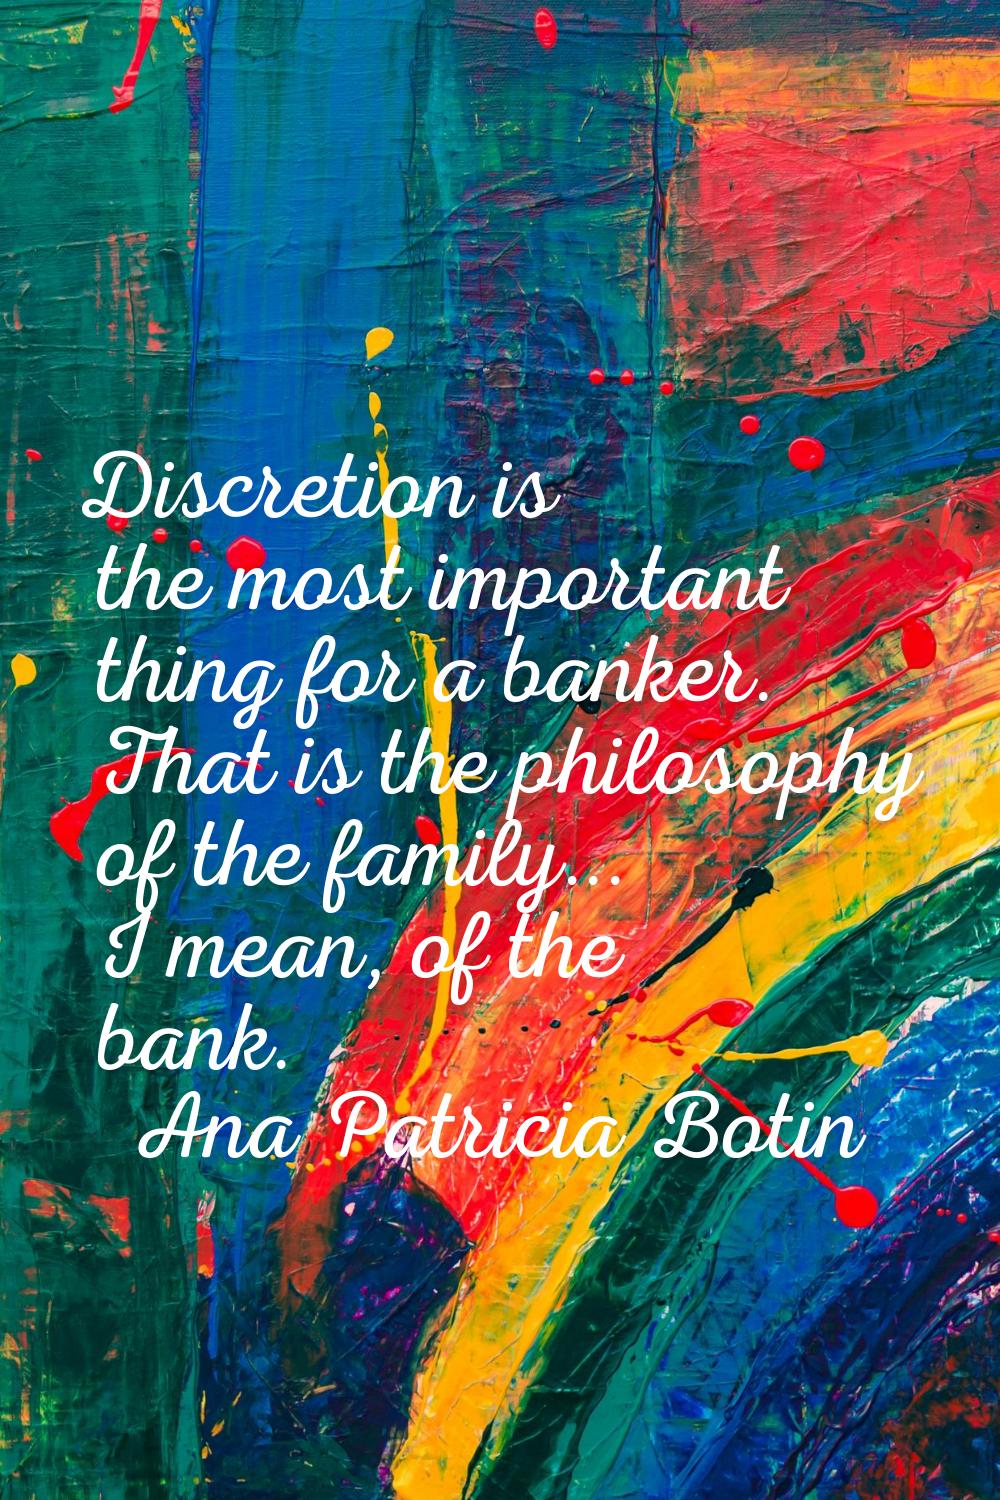 Discretion is the most important thing for a banker. That is the philosophy of the family... I mean